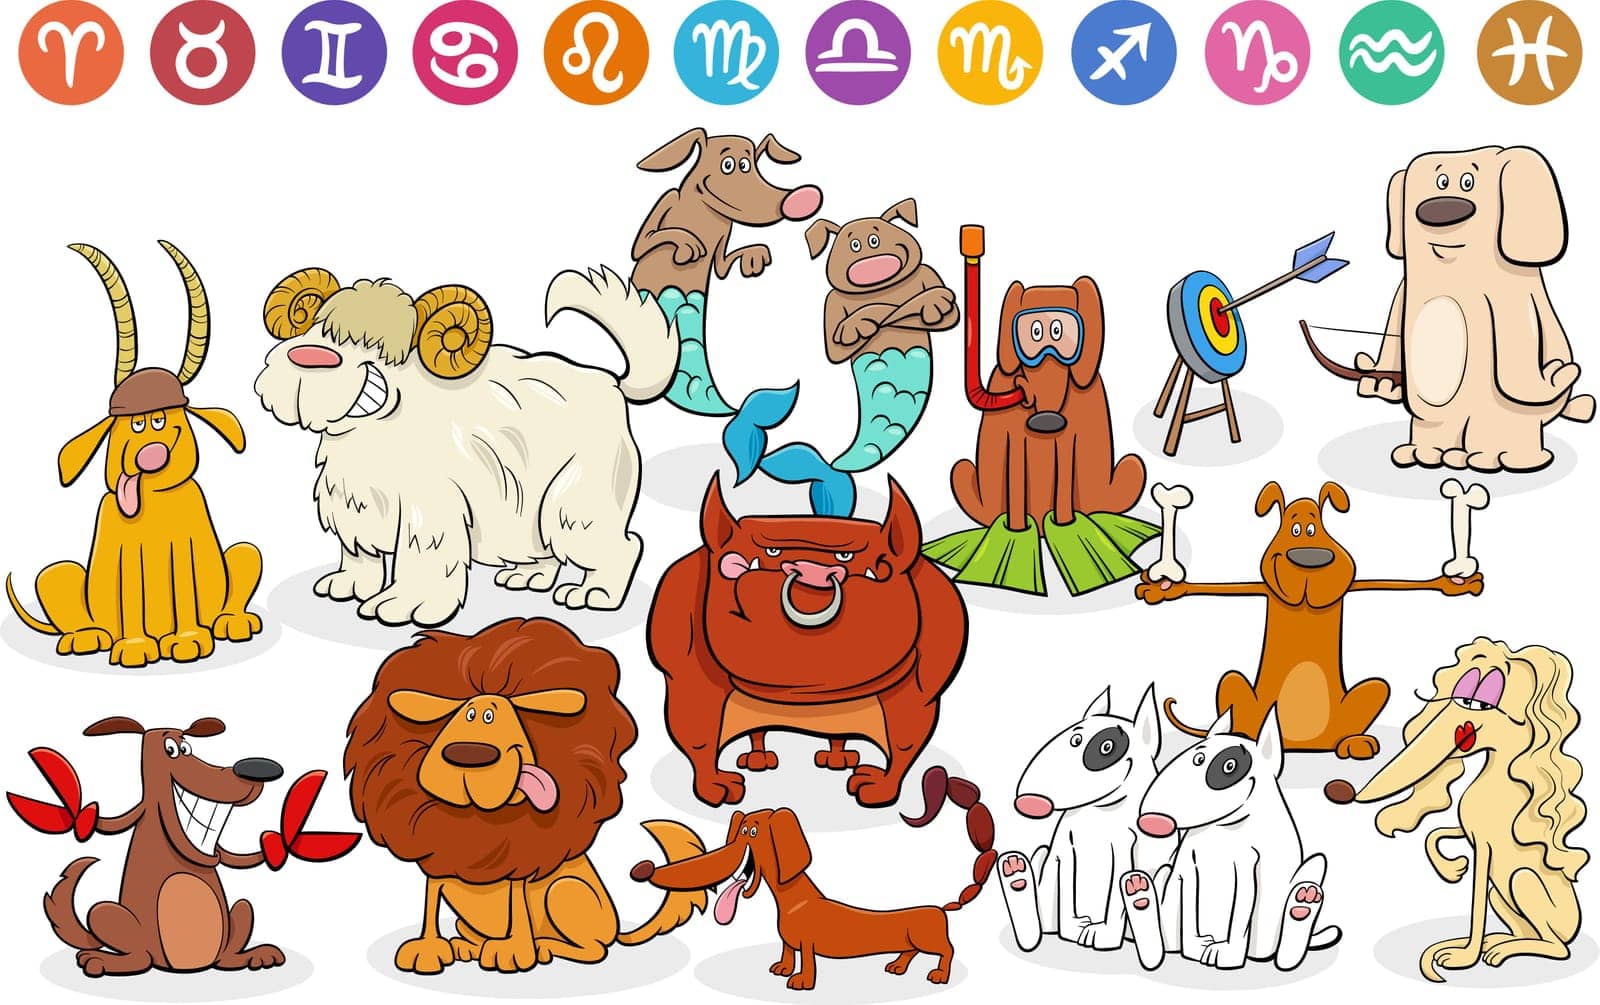 Cartoon illustration of funny dogs animal characters as zodiac signs